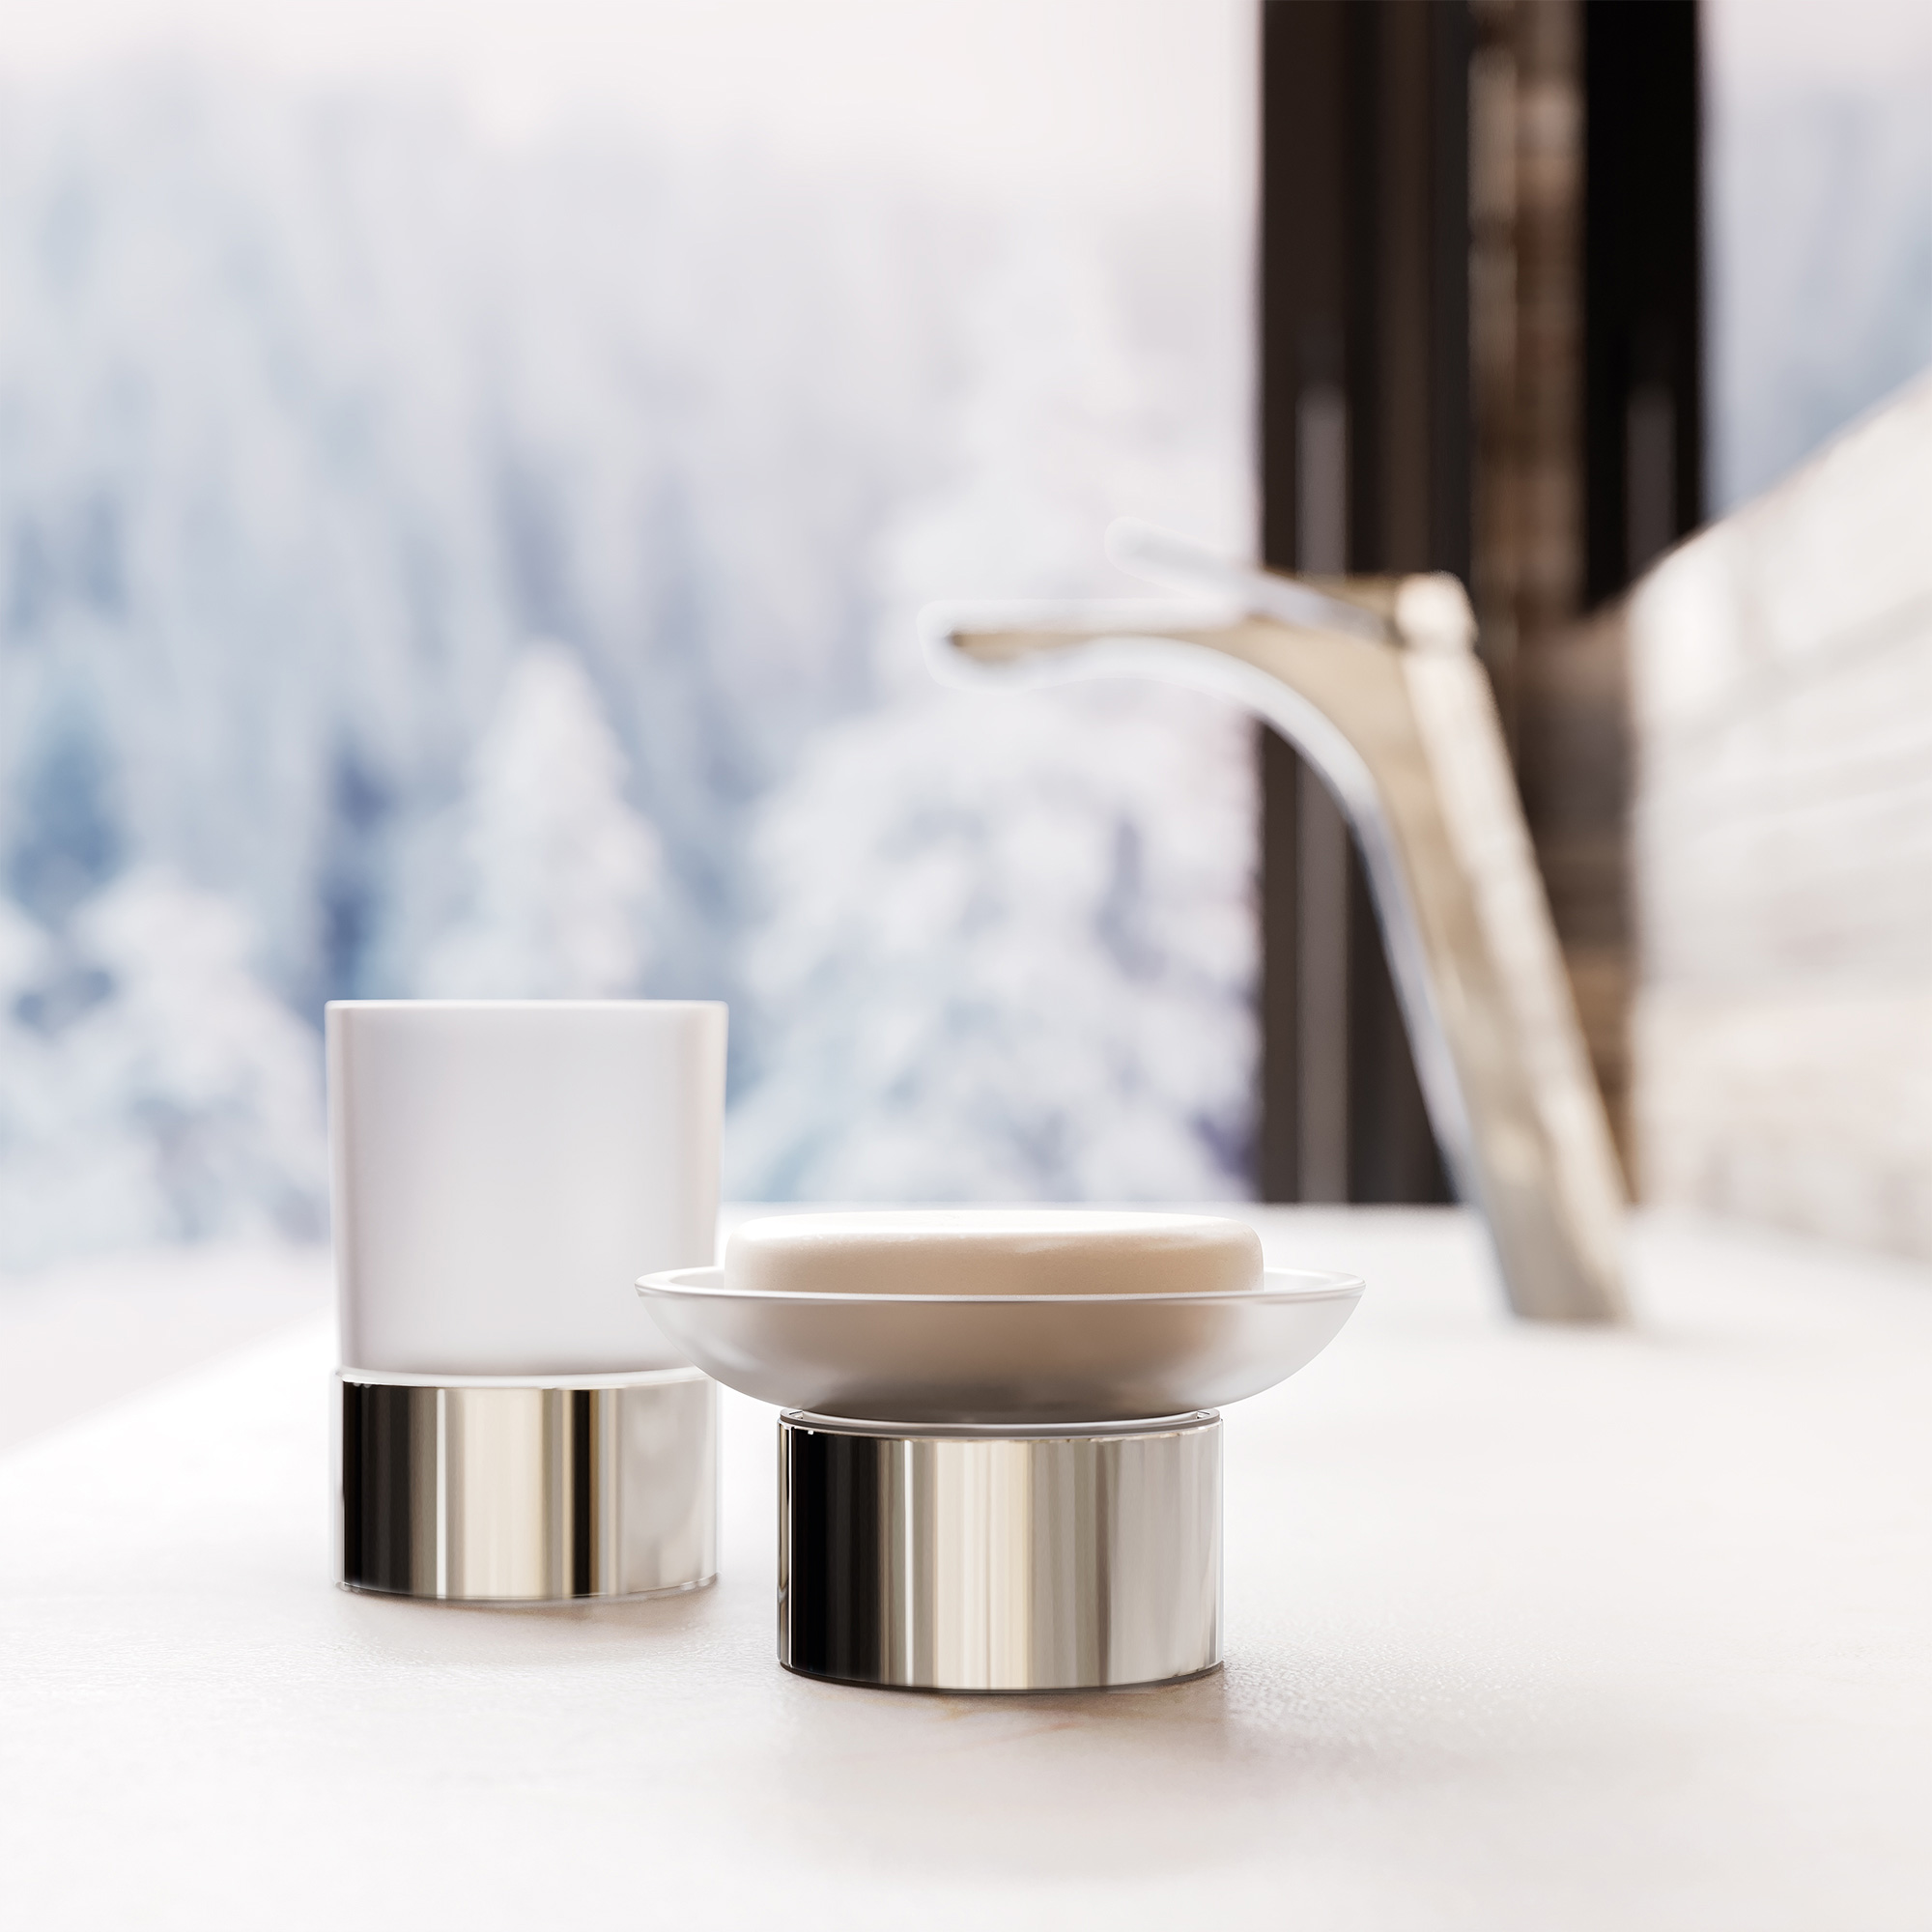 Accessories Fittings Jörger\'s collection in – new the and Alpine Chalet - premiere 2021 “Eleven” Chic stylish celebrates Jörger Bathroom its